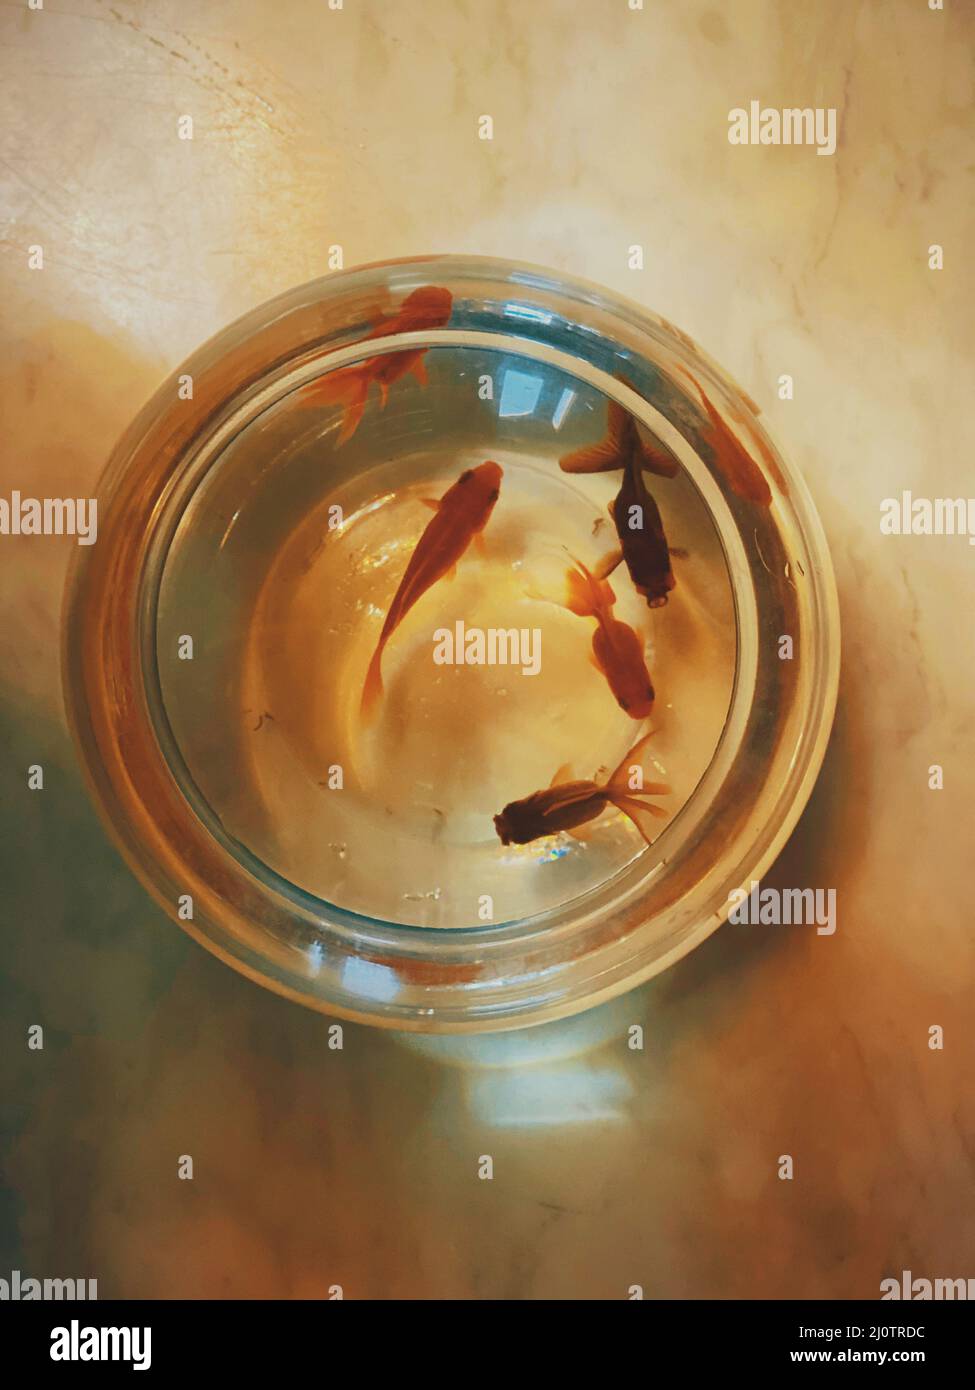 Top view of the small cute goldfish swimming in the round aquarium Stock Photo